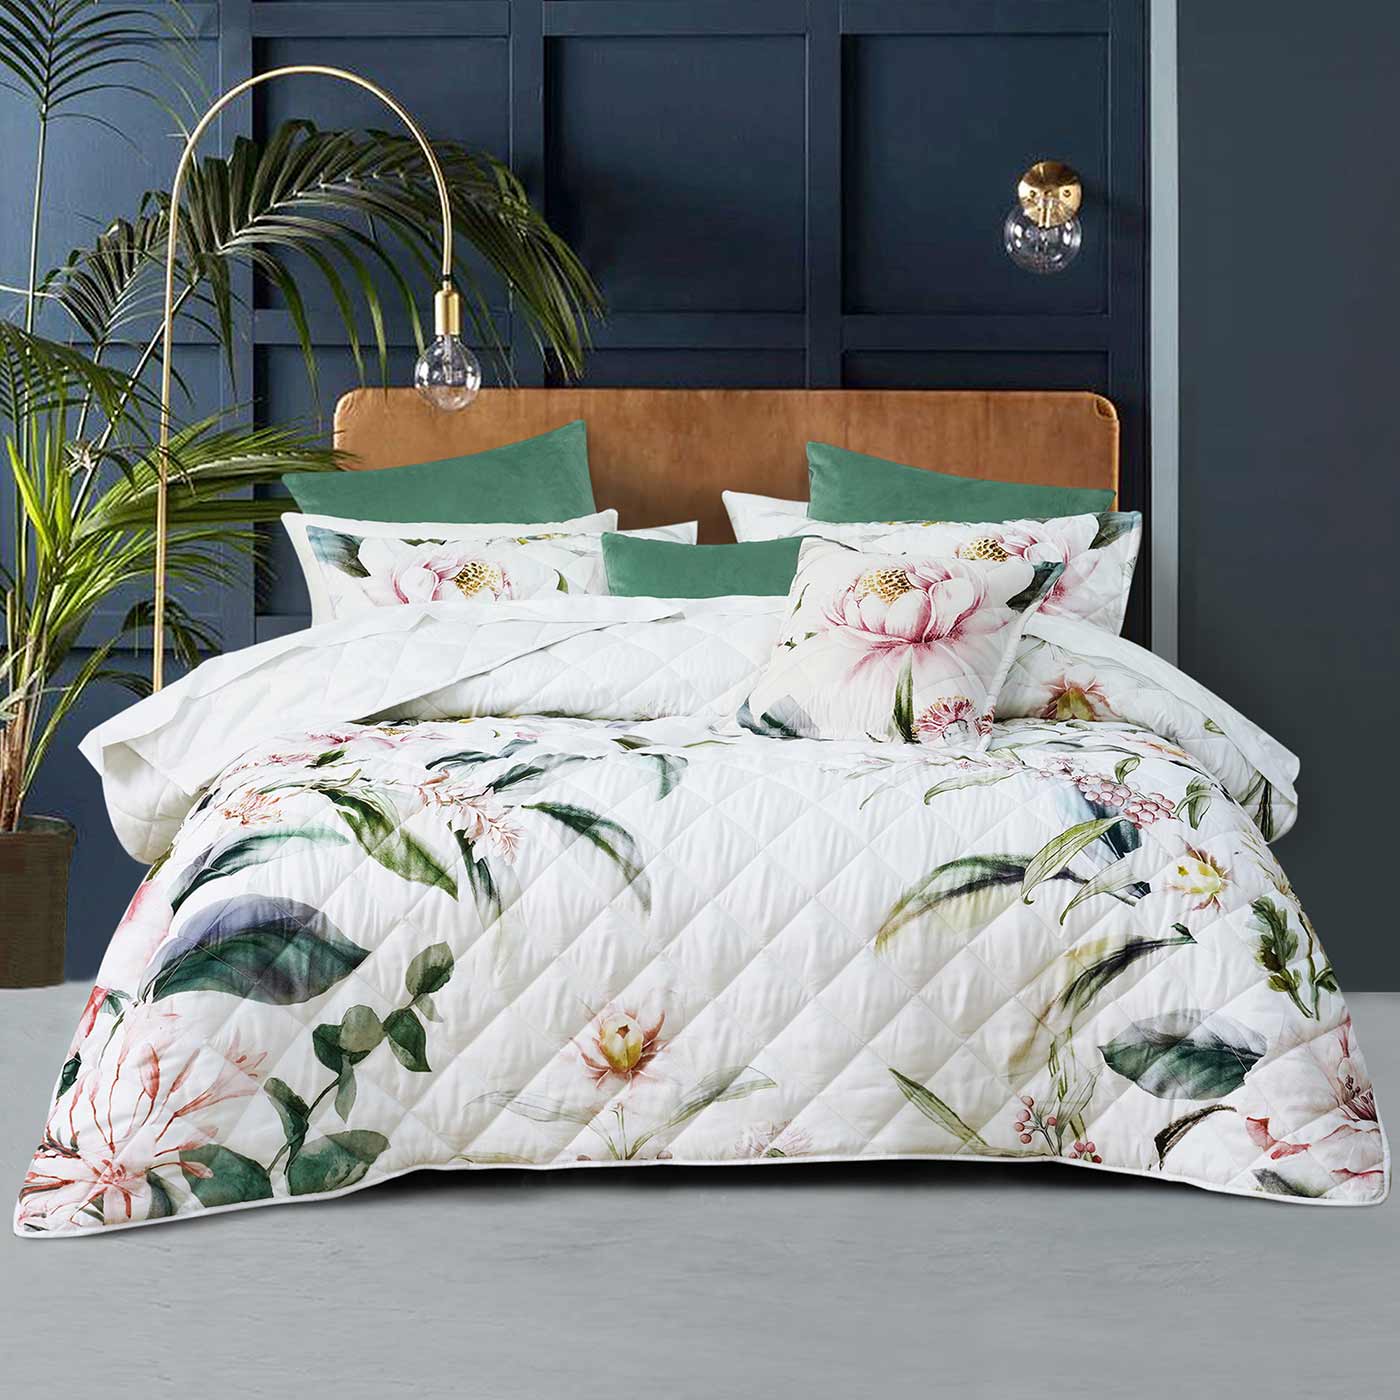 A stunning floral arrangement in feminine blush, green and teal colourings are perfectly positioned over Indi. This pretty hand painted design has been exclusively designed by one of our Australian designers.